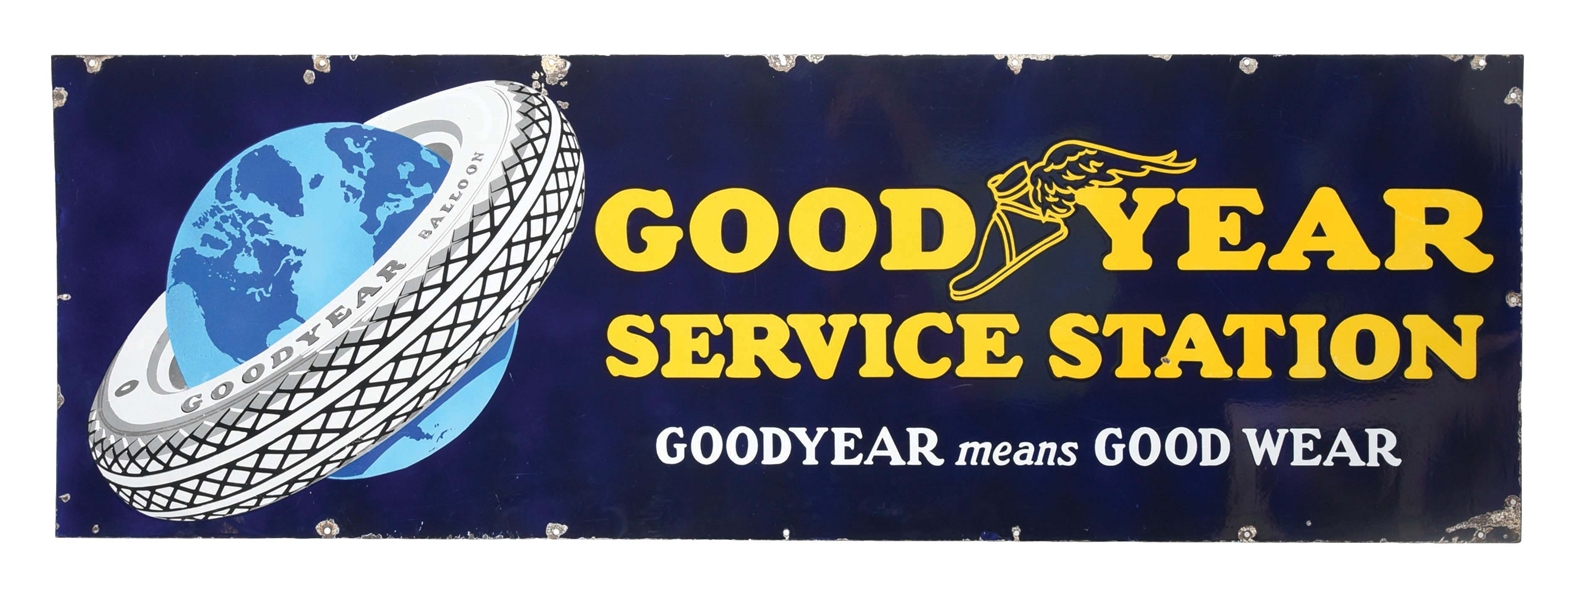 GOODYEAR TIRES SERVICE STATION PORCELAIN SIGN W/ TIRE & GLOBE GRAPHIC. 